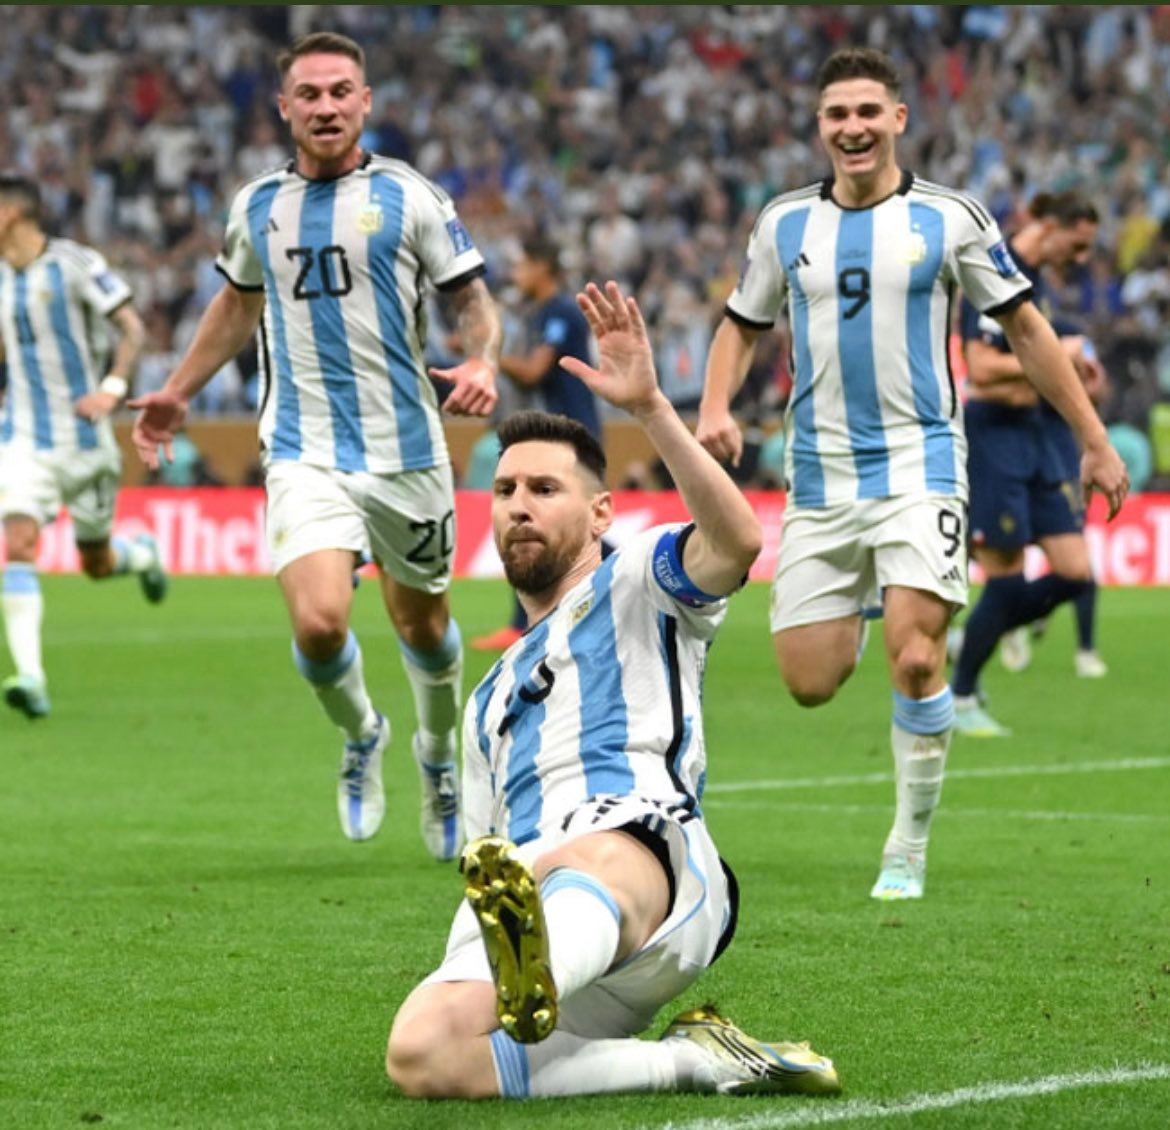 Lionel Messi finally achieved his World Cup dream as Argentina beat France on penalties